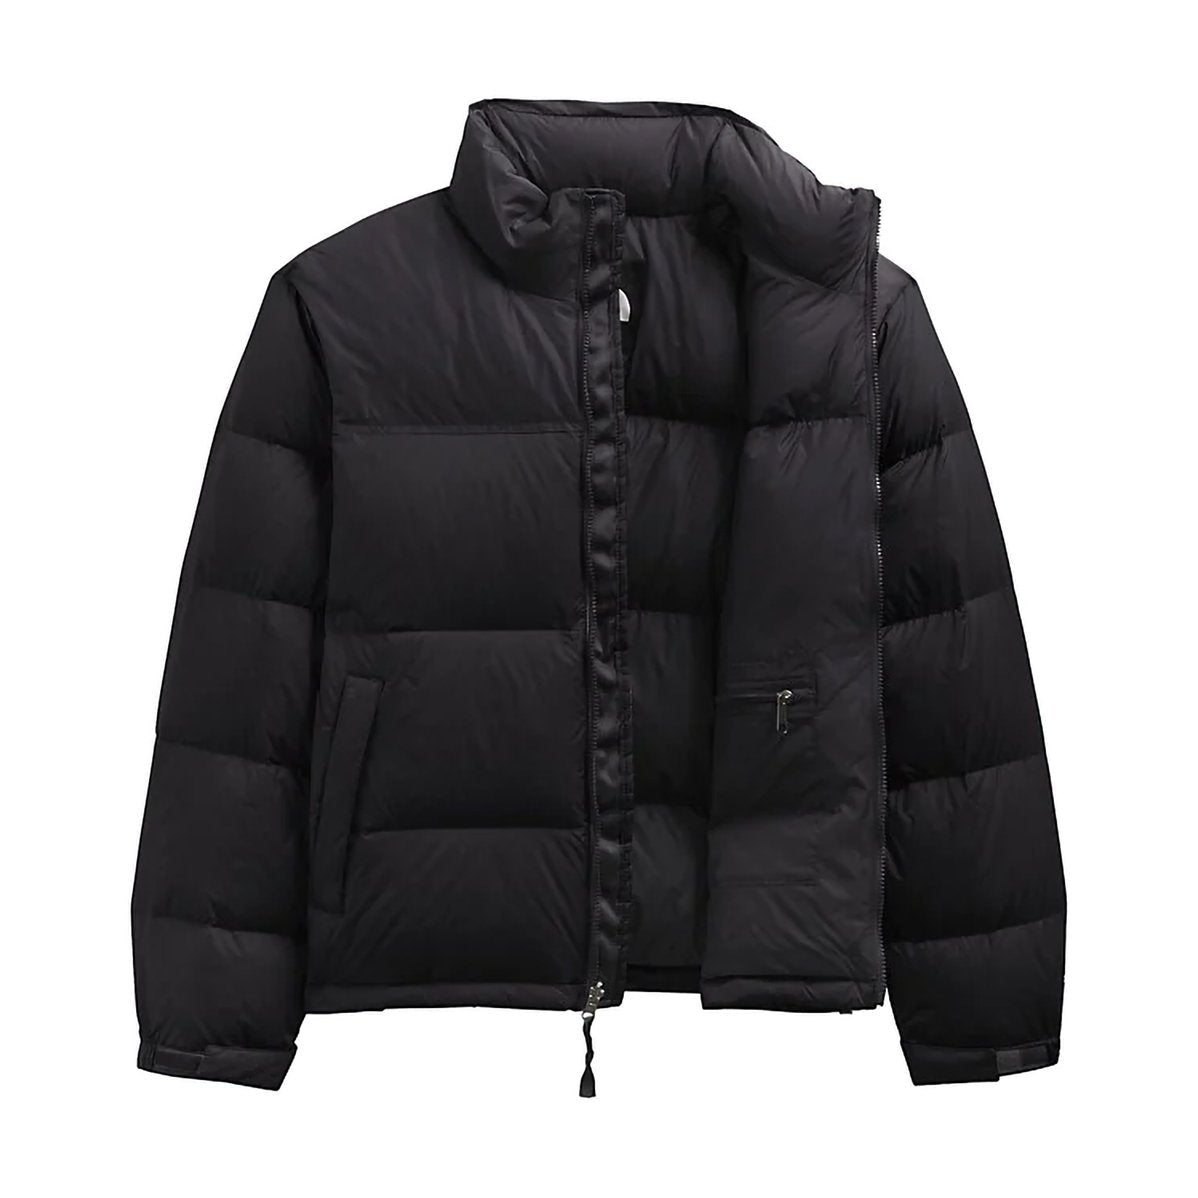 Norse Store  Shipping Worldwide - The North Face HP Nuptse Jacket